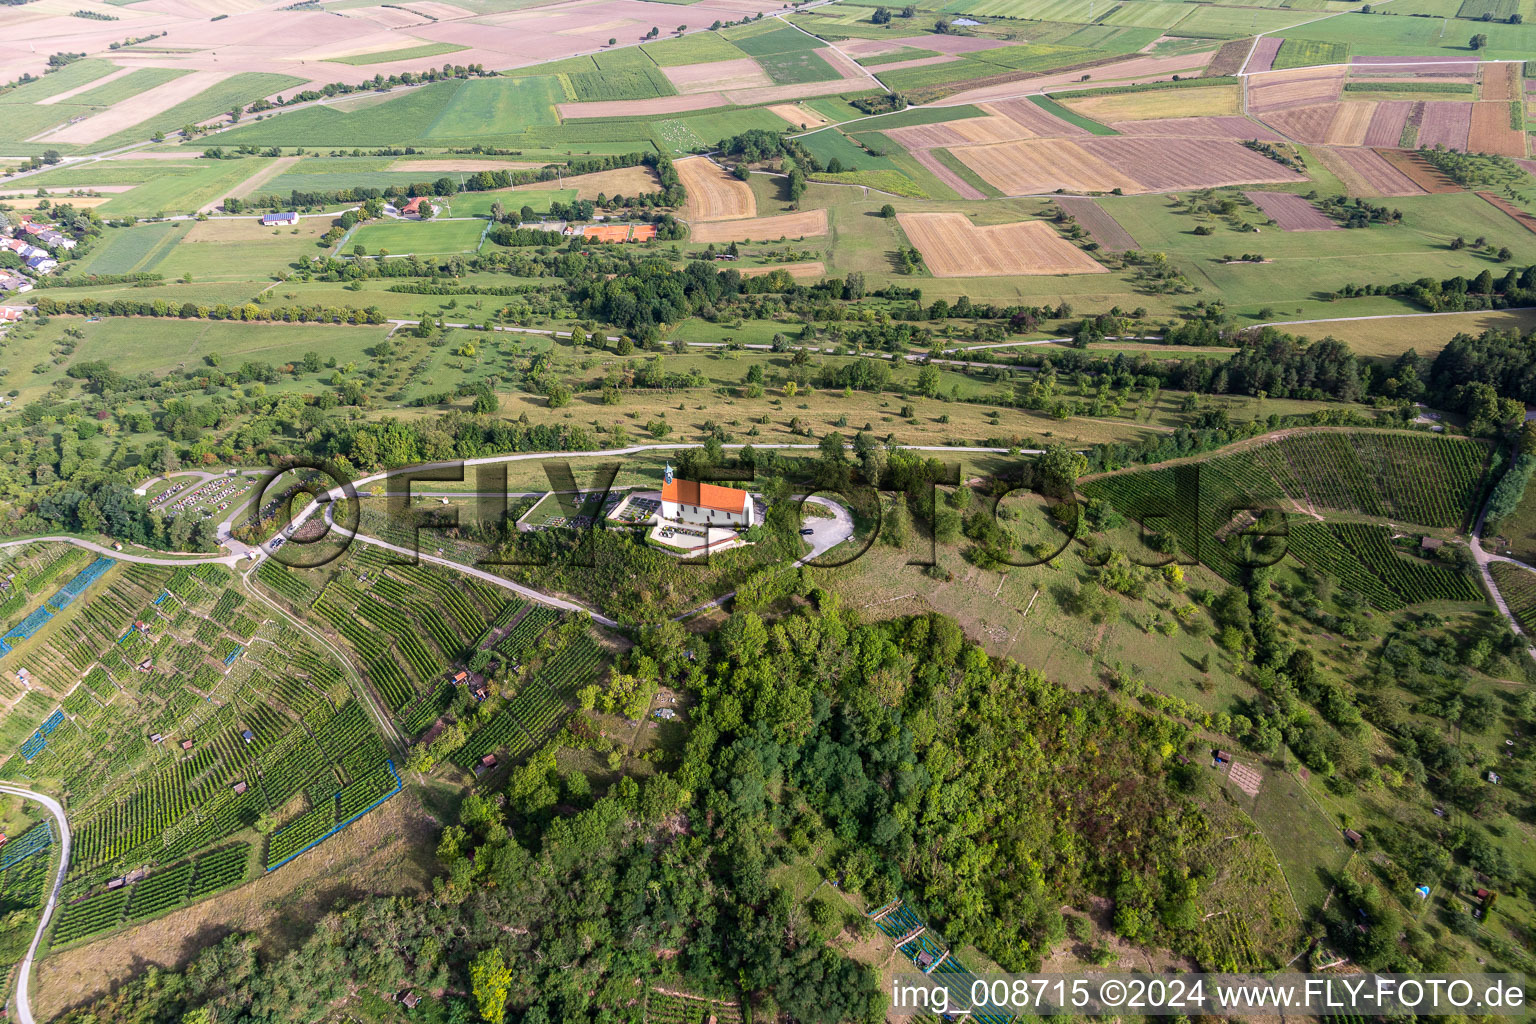 Aerial view of Barn building on the edge of agricultural fields and farmland in Wurmlingen in the state Baden-Wuerttemberg, Germany